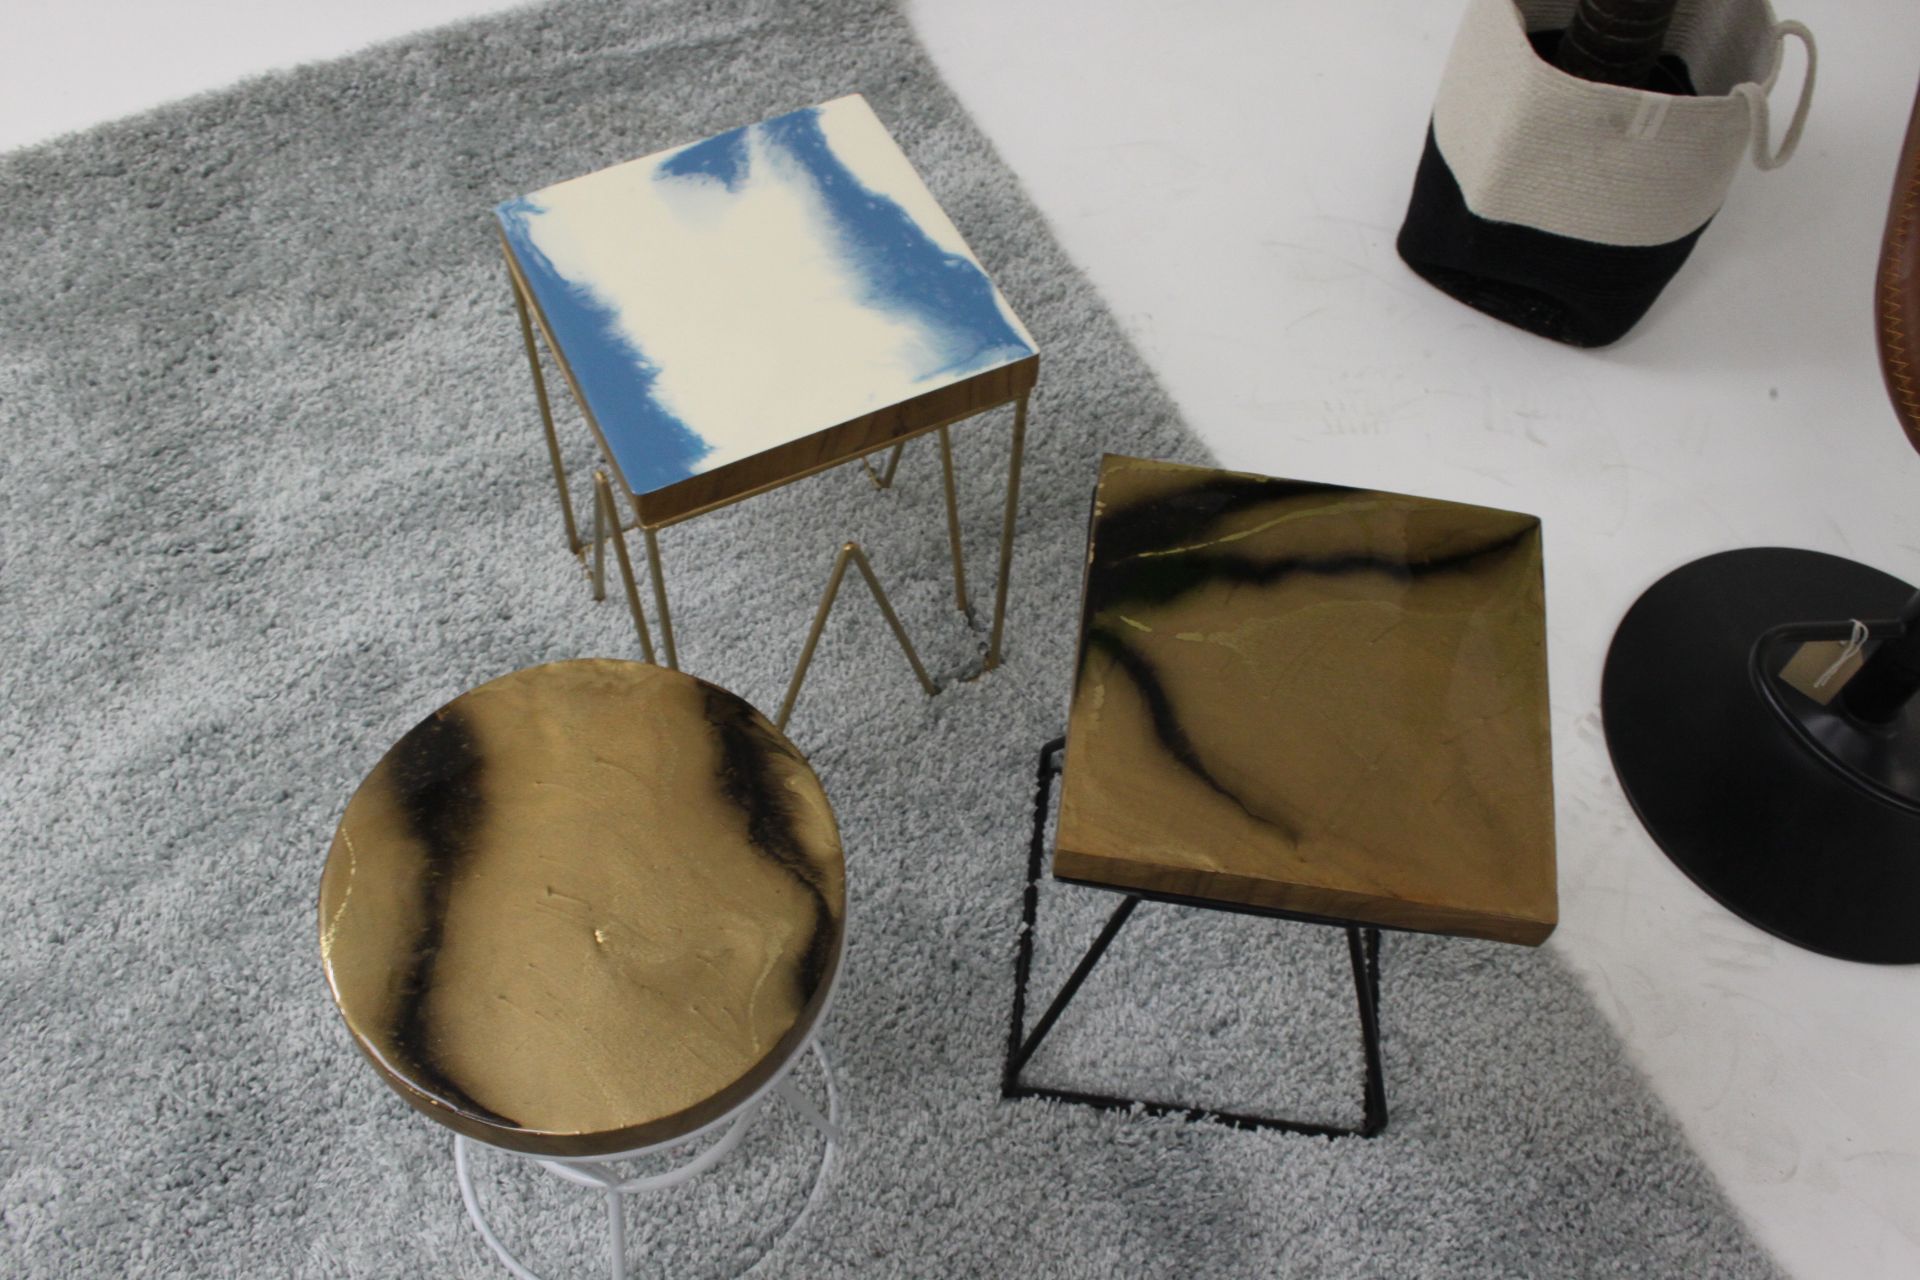 Resin Top Stools (Set Of 3) Each Urethane Resin Top Is Handmade Meaning No Two Stools Will Be